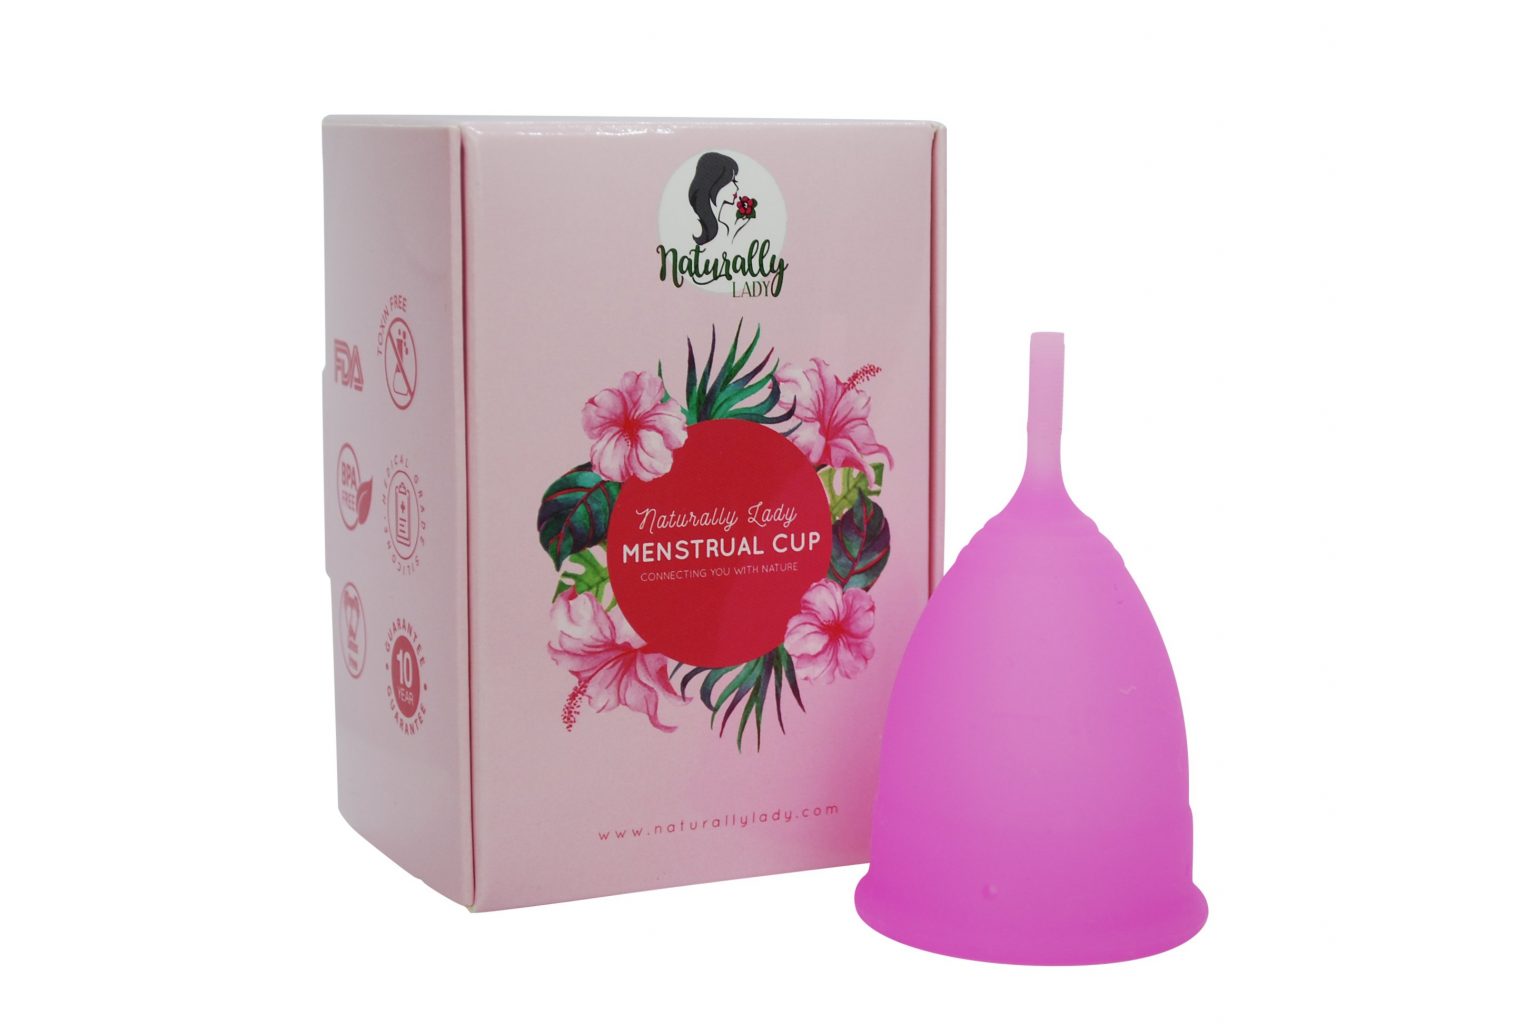 Menstrual Cup Naturally Lady Large Cup